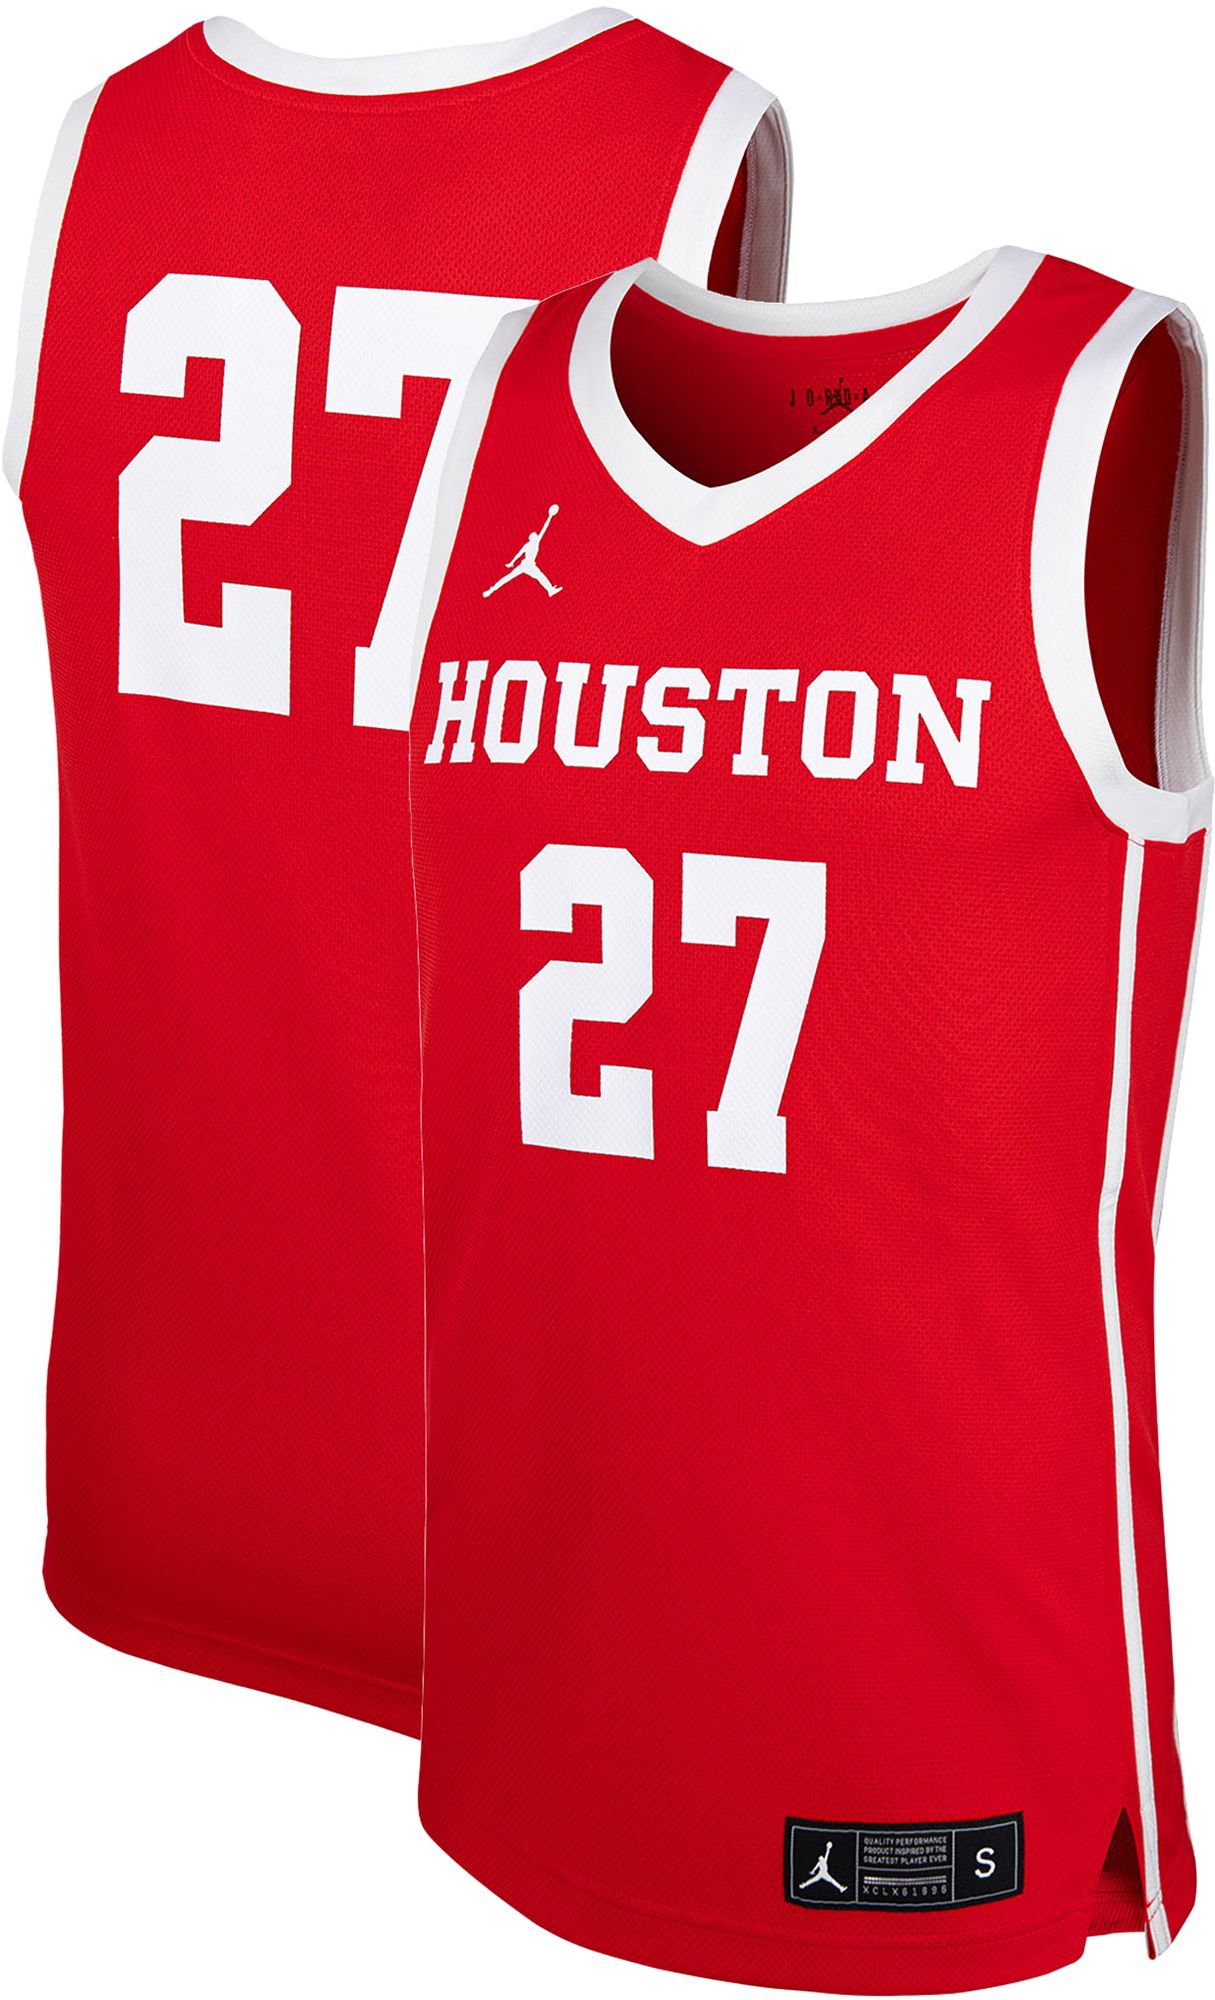 Cougars NCAA tournament jersey